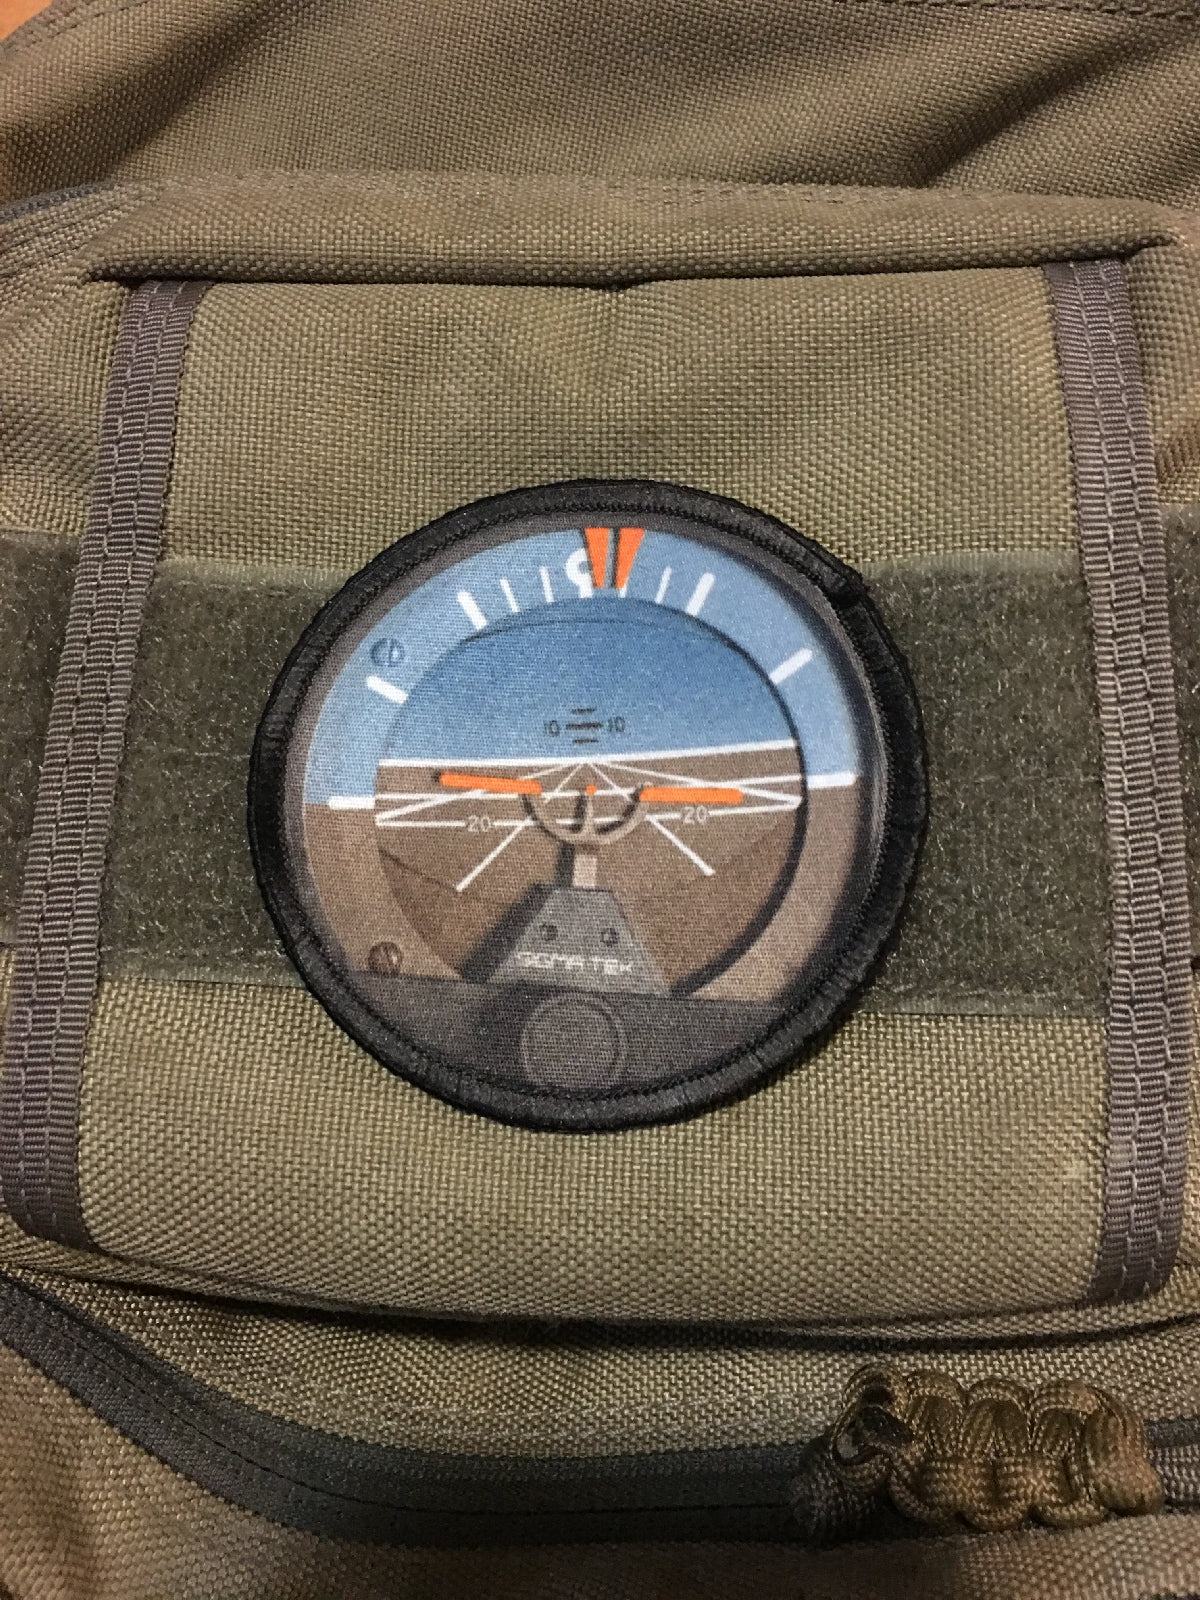 Airplane Artificial Horizon 3" Round Morale Patch Morale Patches Redheaded T Shirts 